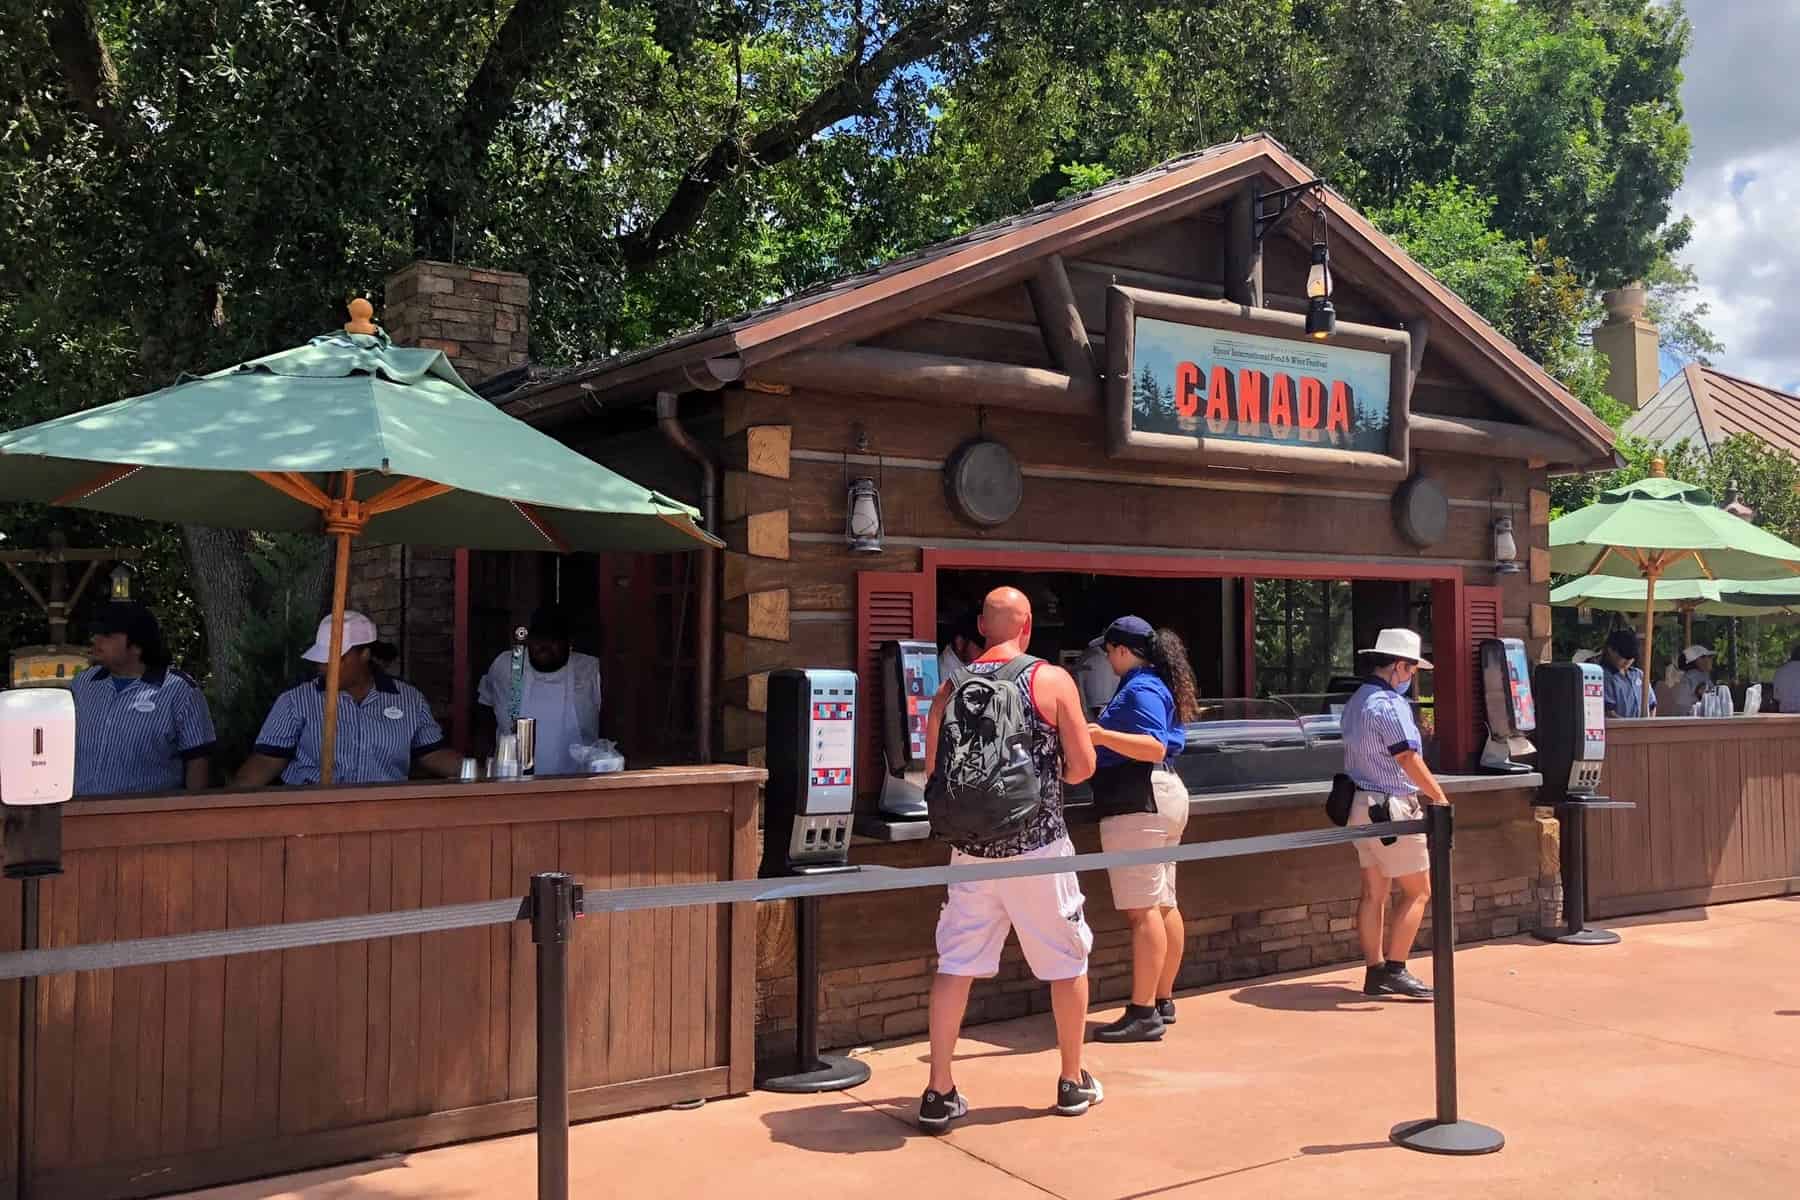 Canada Booth Menu & Review (Epcot Food & Wine Festival)